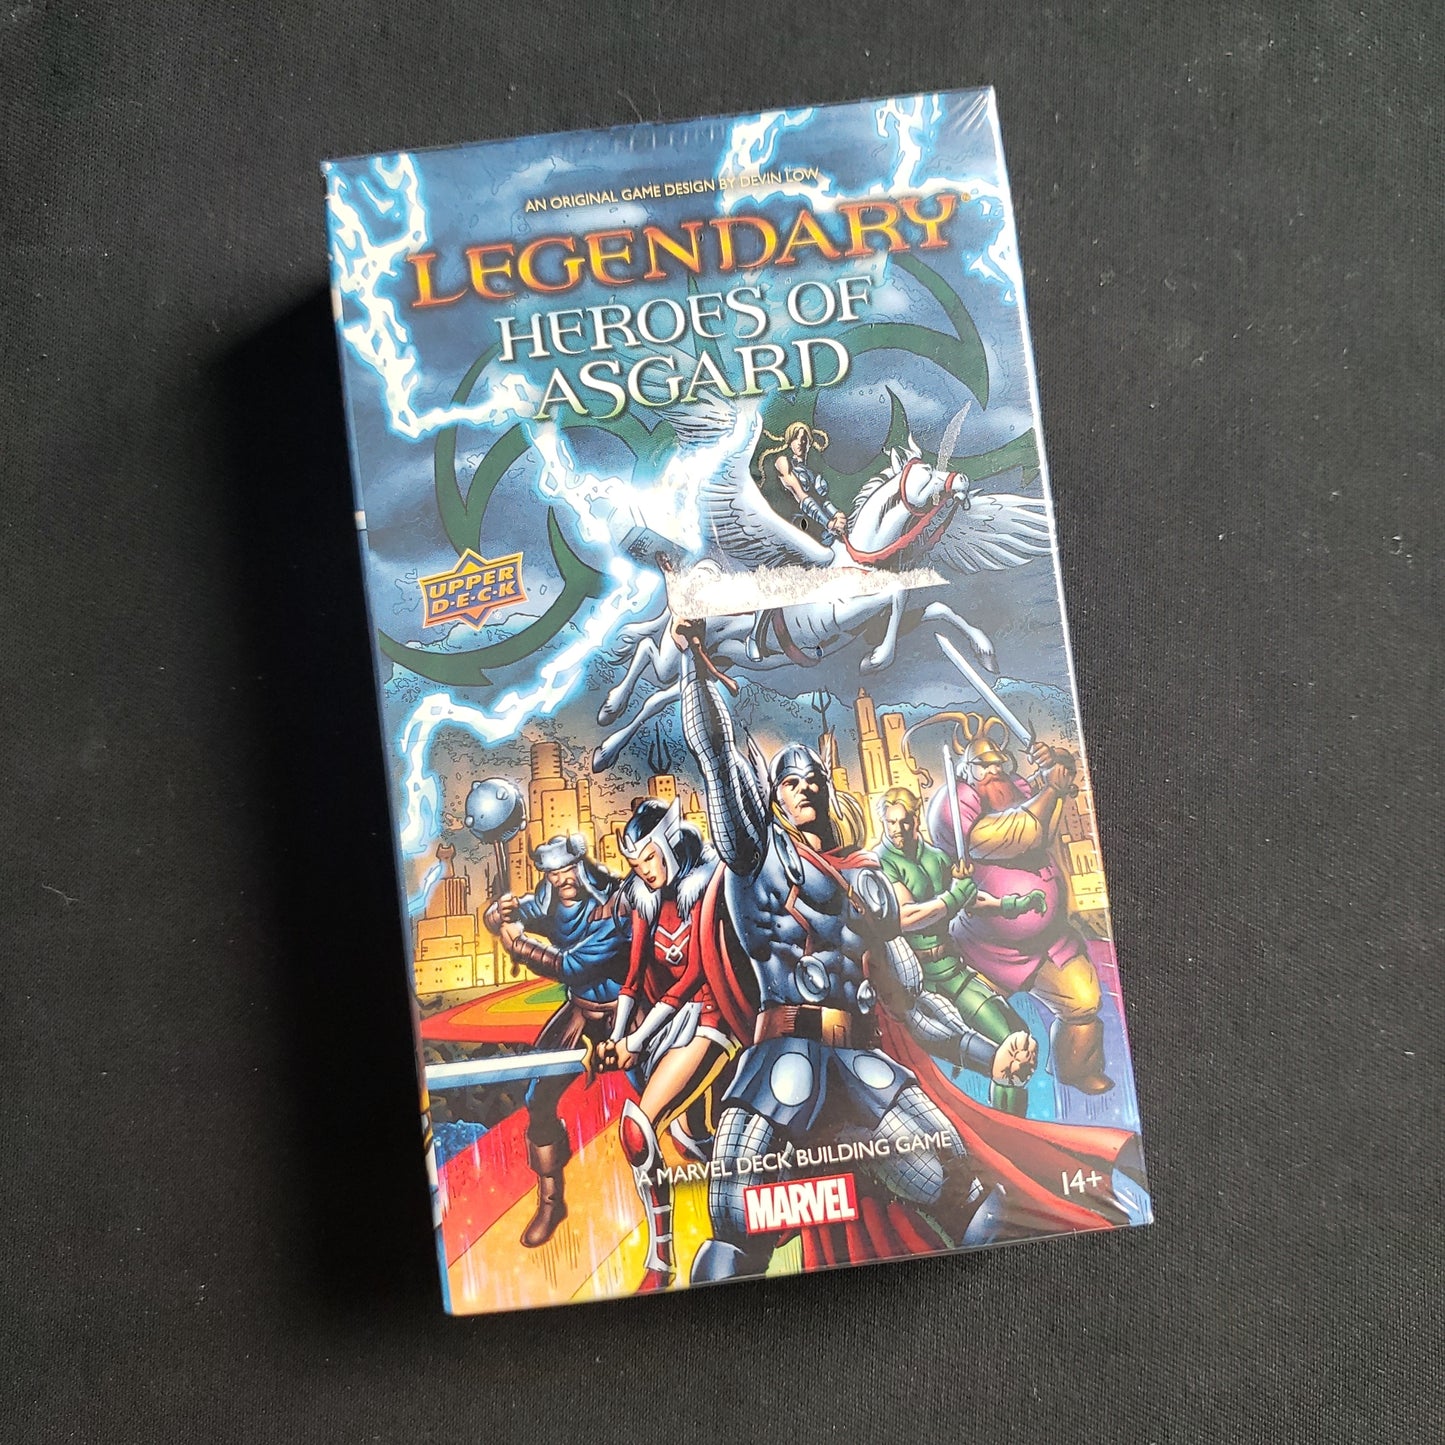 Image shows the front cover of the box of the Heroes of Asgard expansion for the Marvel Legendary card game